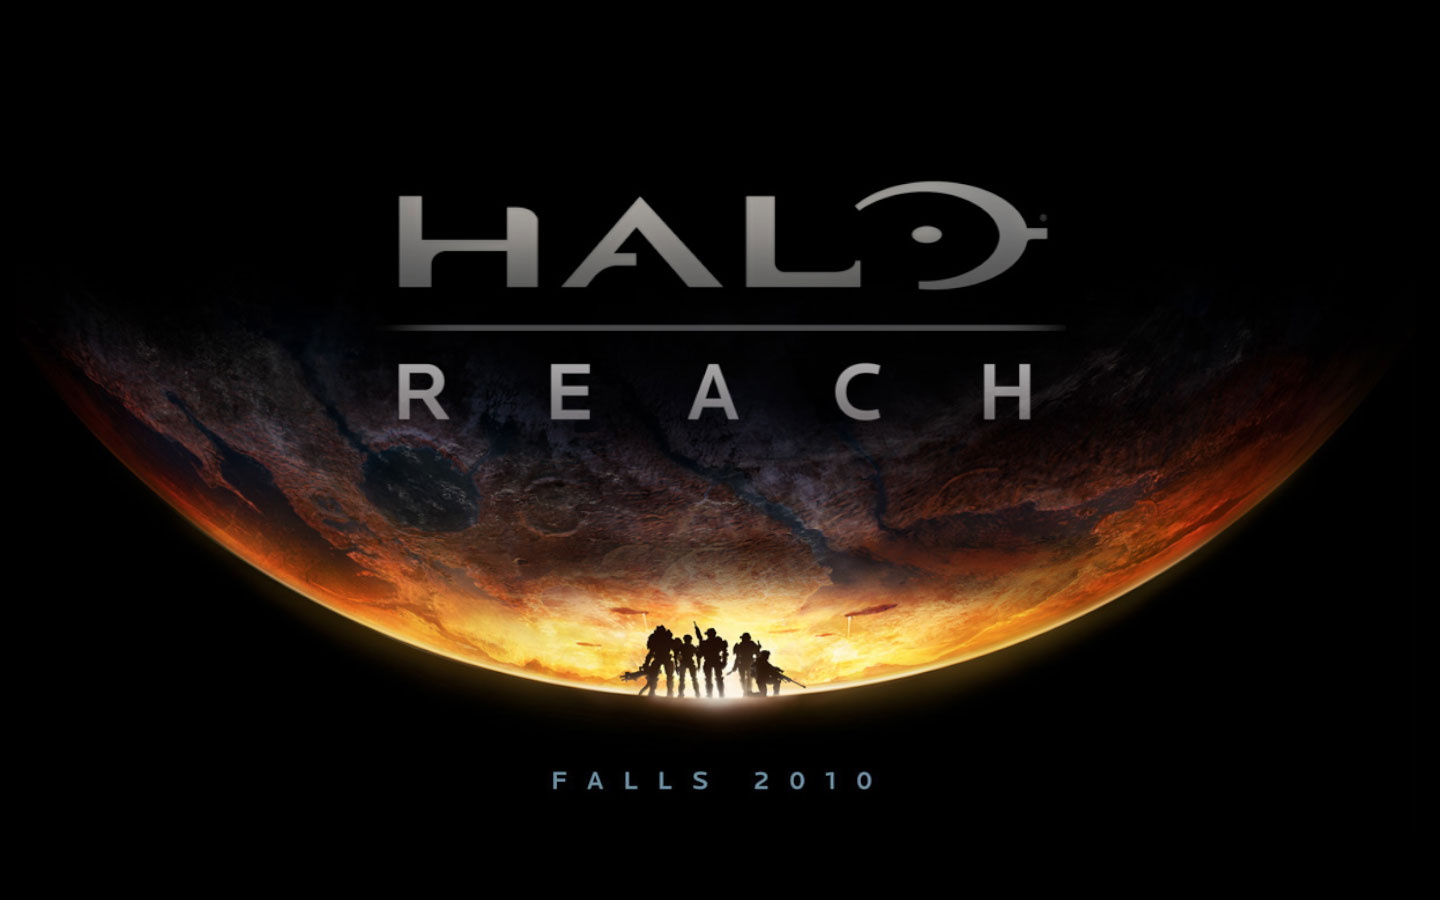 Sequel Halo Reach Was Released Two Days Ago 14th September